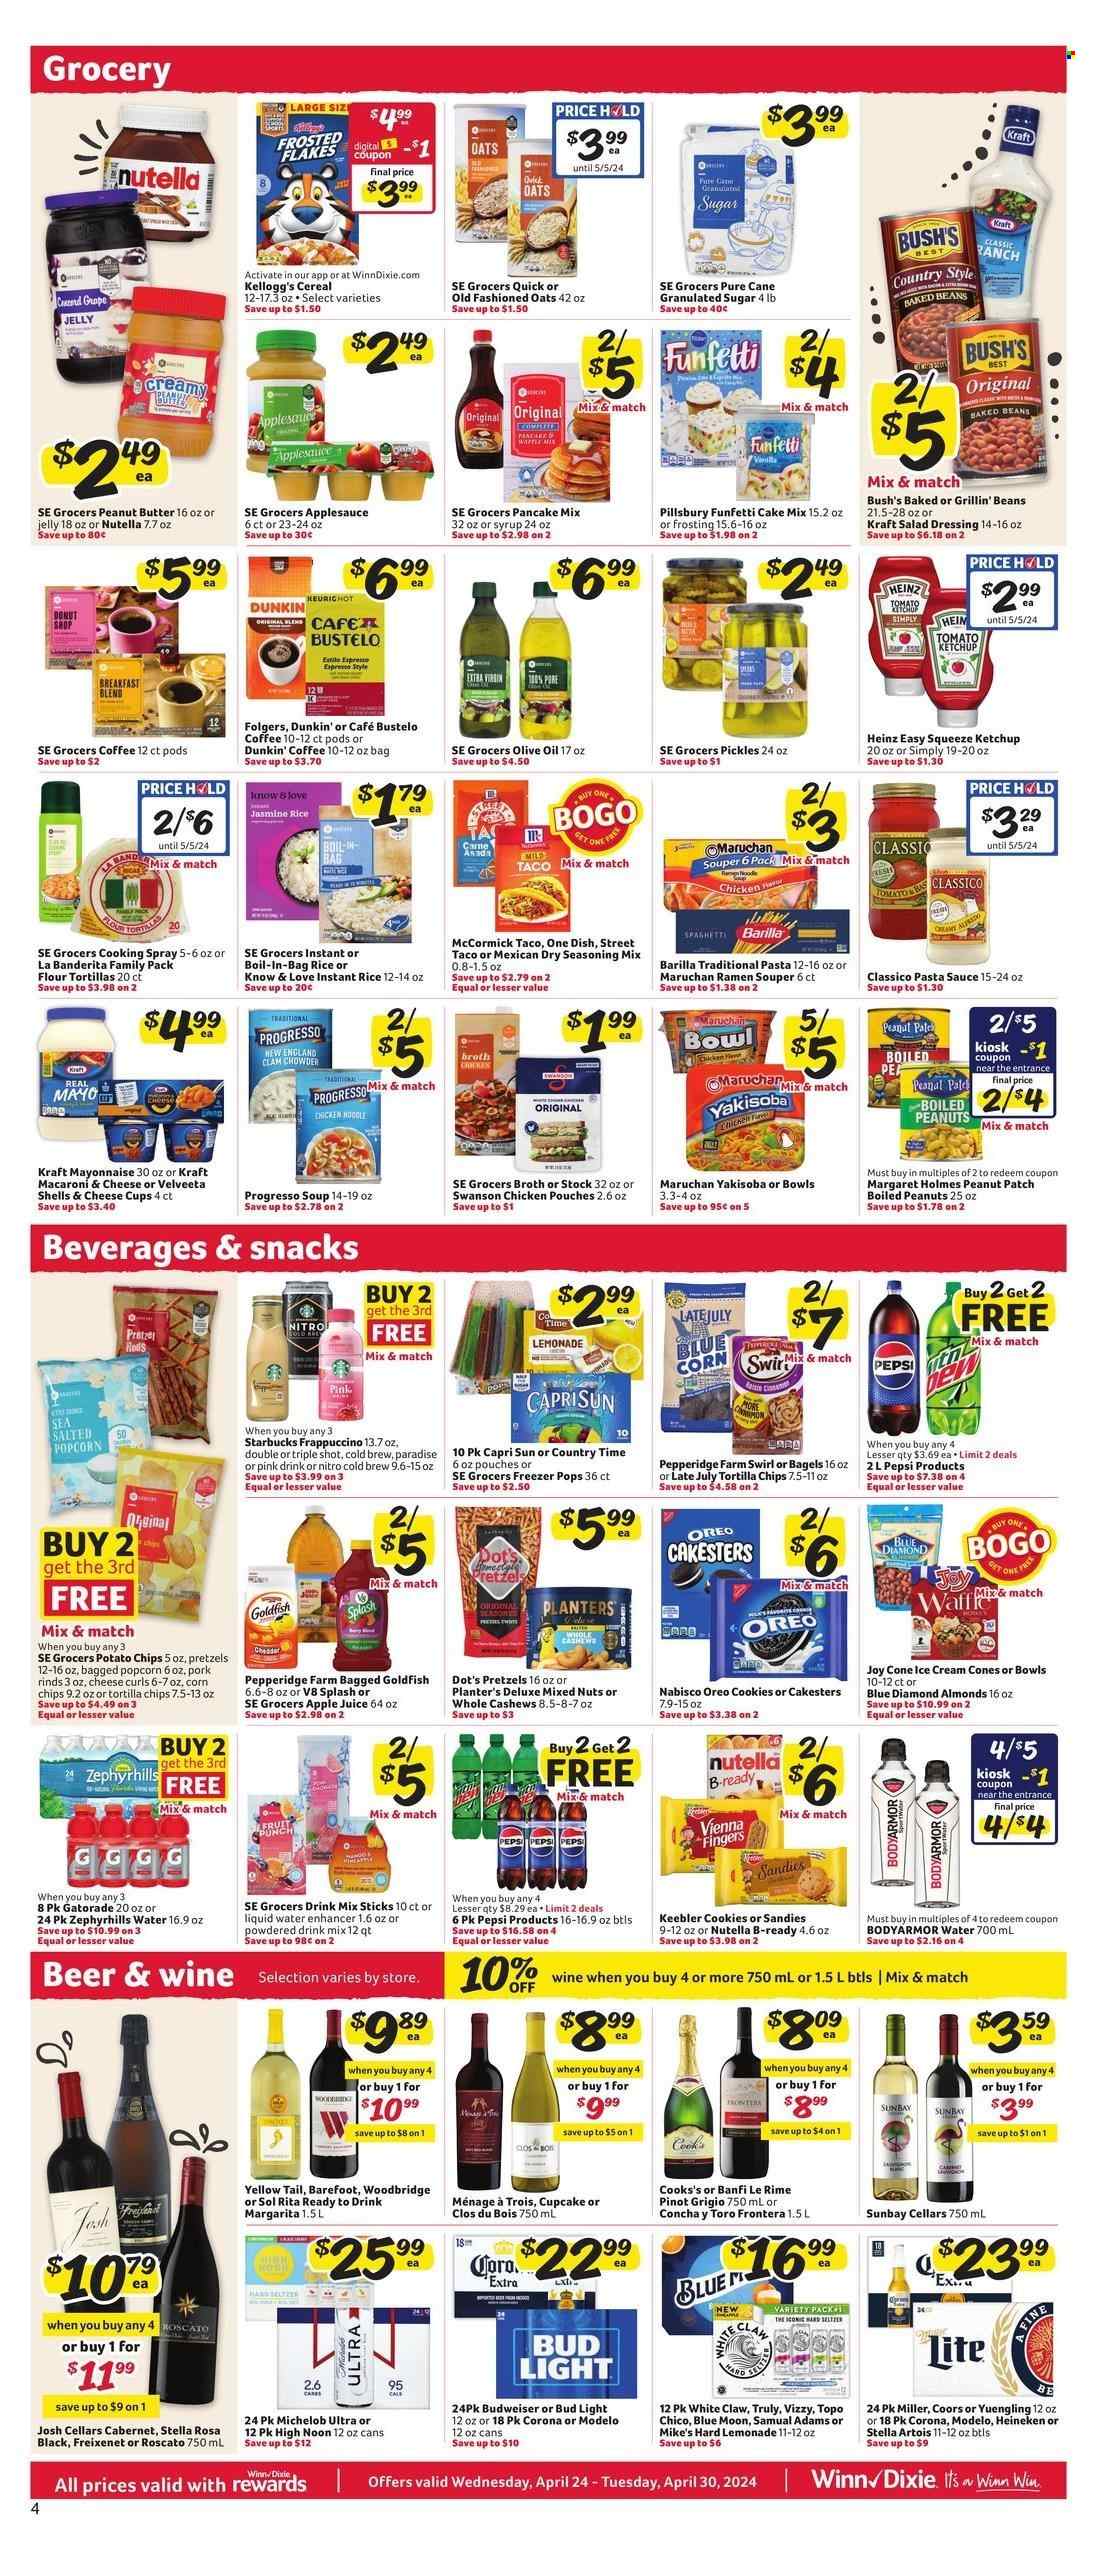 thumbnail - Winn Dixie Flyer - 04/24/2024 - 04/30/2024 - Sales products - beer, Stella Artois, Corona Extra, Heineken, Miller, Modelo, Coors, Yuengling, lemonade, White Claw, Hard Seltzer, TRULY, Topo Chico, Blue Moon, potato chips, chips, Budweiser, Bud Light, wine, Michelob, sparkling wine, alcohol, cookies, Nutella, Keebler, electrolyte drink, water, Gatorade, Pepsi, soft drink, carbonated soft drink, white wine, Pinot Grigio, Goldfish, salty snack, apple juice, juice, fruit drink, pretzels, cashews, mixed nuts, ice cones, almonds, Blue Diamond, bowl, syrup, powder drink, Woodbridge, ready to drink spirits, ramen, pasta, instant noodles, Barilla, coffee drink, Starbucks, frappuccino, Heinz, ketchup, pancake mix, tortillas, flour tortillas, cooking spray, pickles, pickled vegetables, spice, seasoning, apple sauce, sauce, olive oil, oil, oats, beans, Kraft®, baked beans, salad dressing, dressing, soup, Progresso, ready meal, peanuts, ice cream bars, Capri Sun, Country Time, bagels, tortilla chips, pasta sauce, spaghetti sauce, Classico, macaroni & cheese, Velveeta, mayonnaise, broth, chicken, Oreo, Nabisco, jelly, peanut butter, hazelnut spread, coffee, coffee pods, Folgers, Kellogg's, cereals, cane sugar, granulated sugar, sugar, cake mix, Pillsbury, baking mix. Page 7.